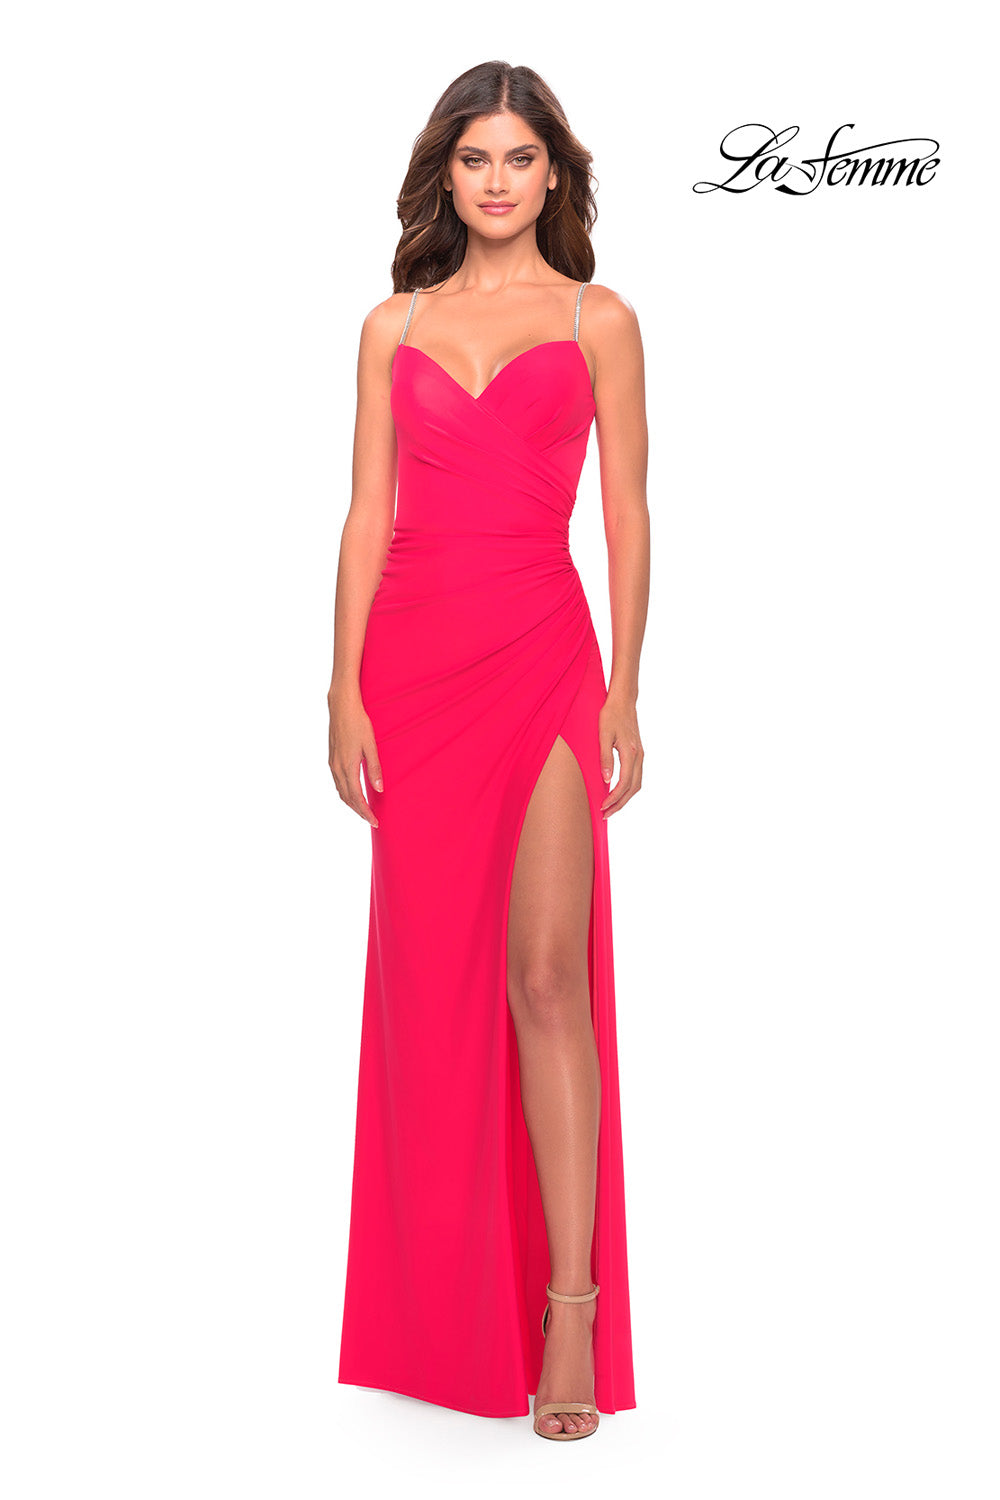 La Femme 31224 prom dress images.  La Femme 31224 is available in these colors: Hot Coral.